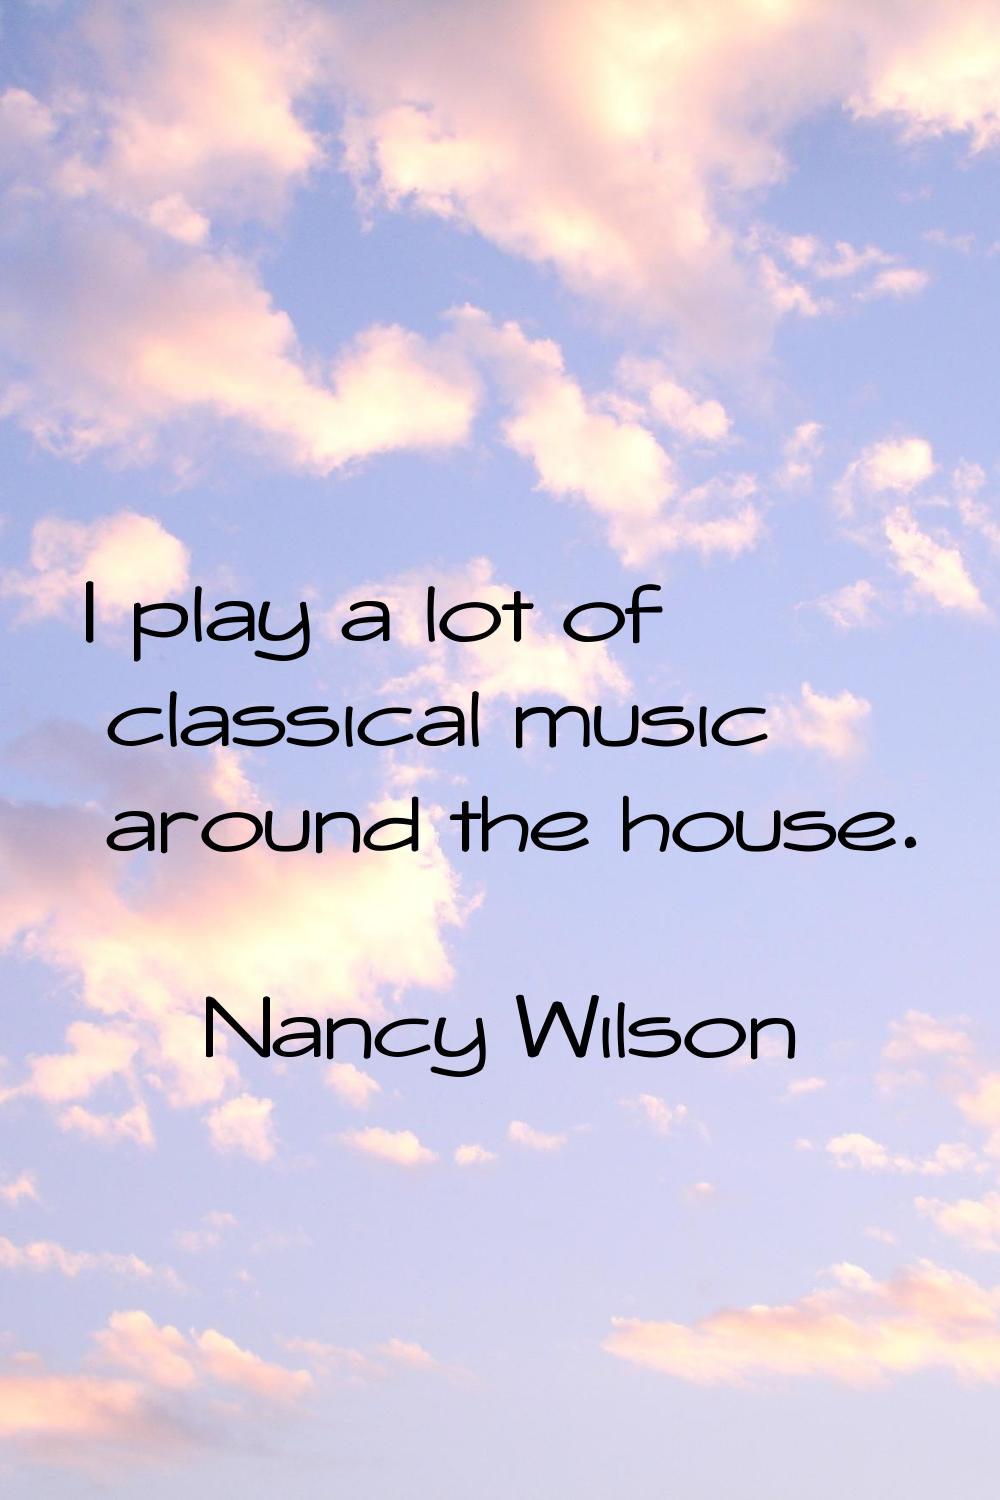 I play a lot of classical music around the house.